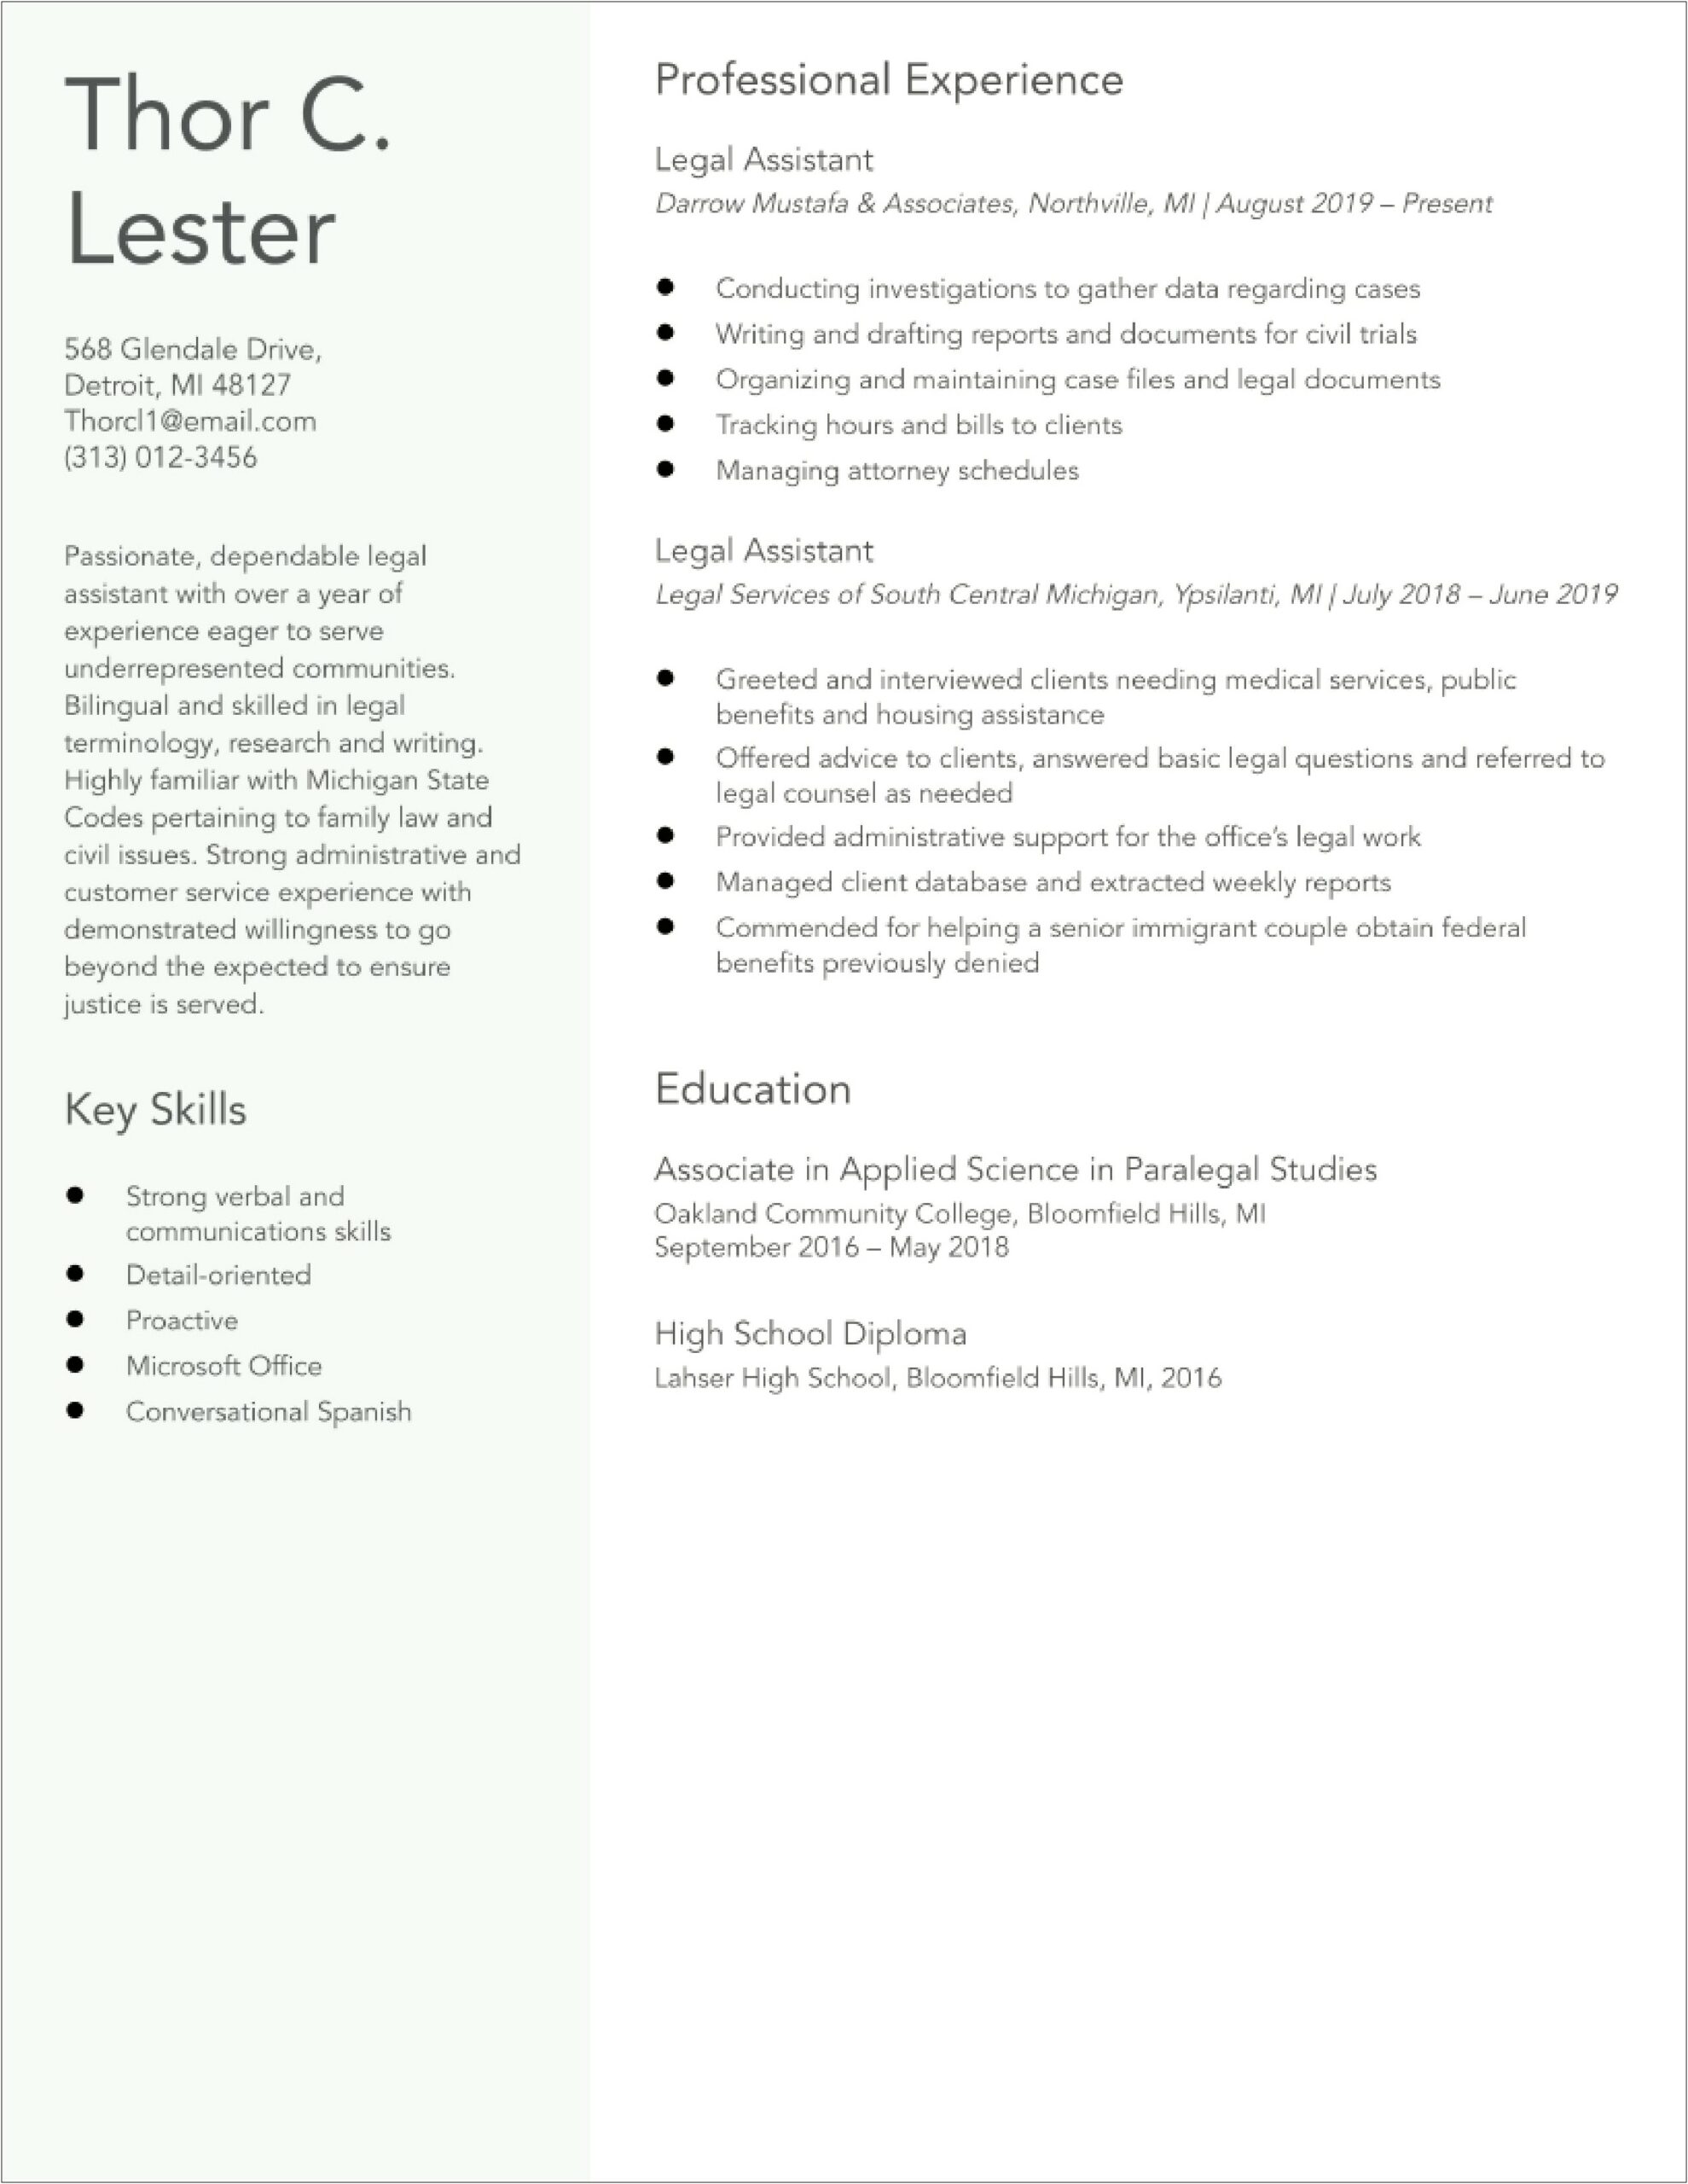 Entry Level Legal Assistant Resume Examples